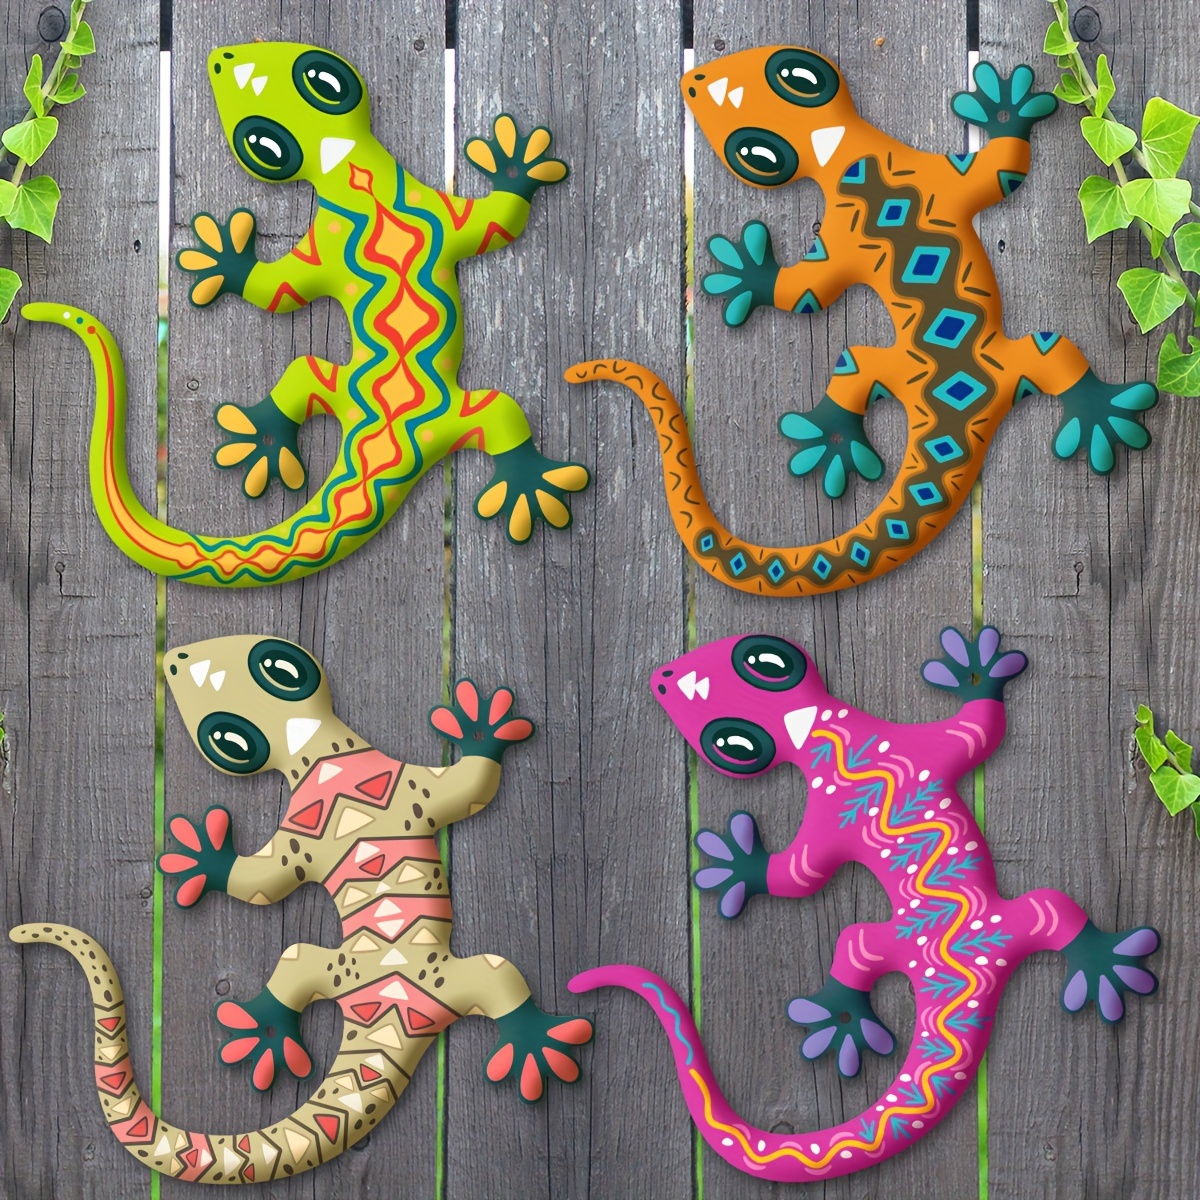 

4pcs Colorful Metal Wall Decorations, Iron Lizard Garden Wall Hanging Art For Patio, Balcony, Yard, Fence, Indoor And Outdoor Decor, Ideal Housewarming Gift